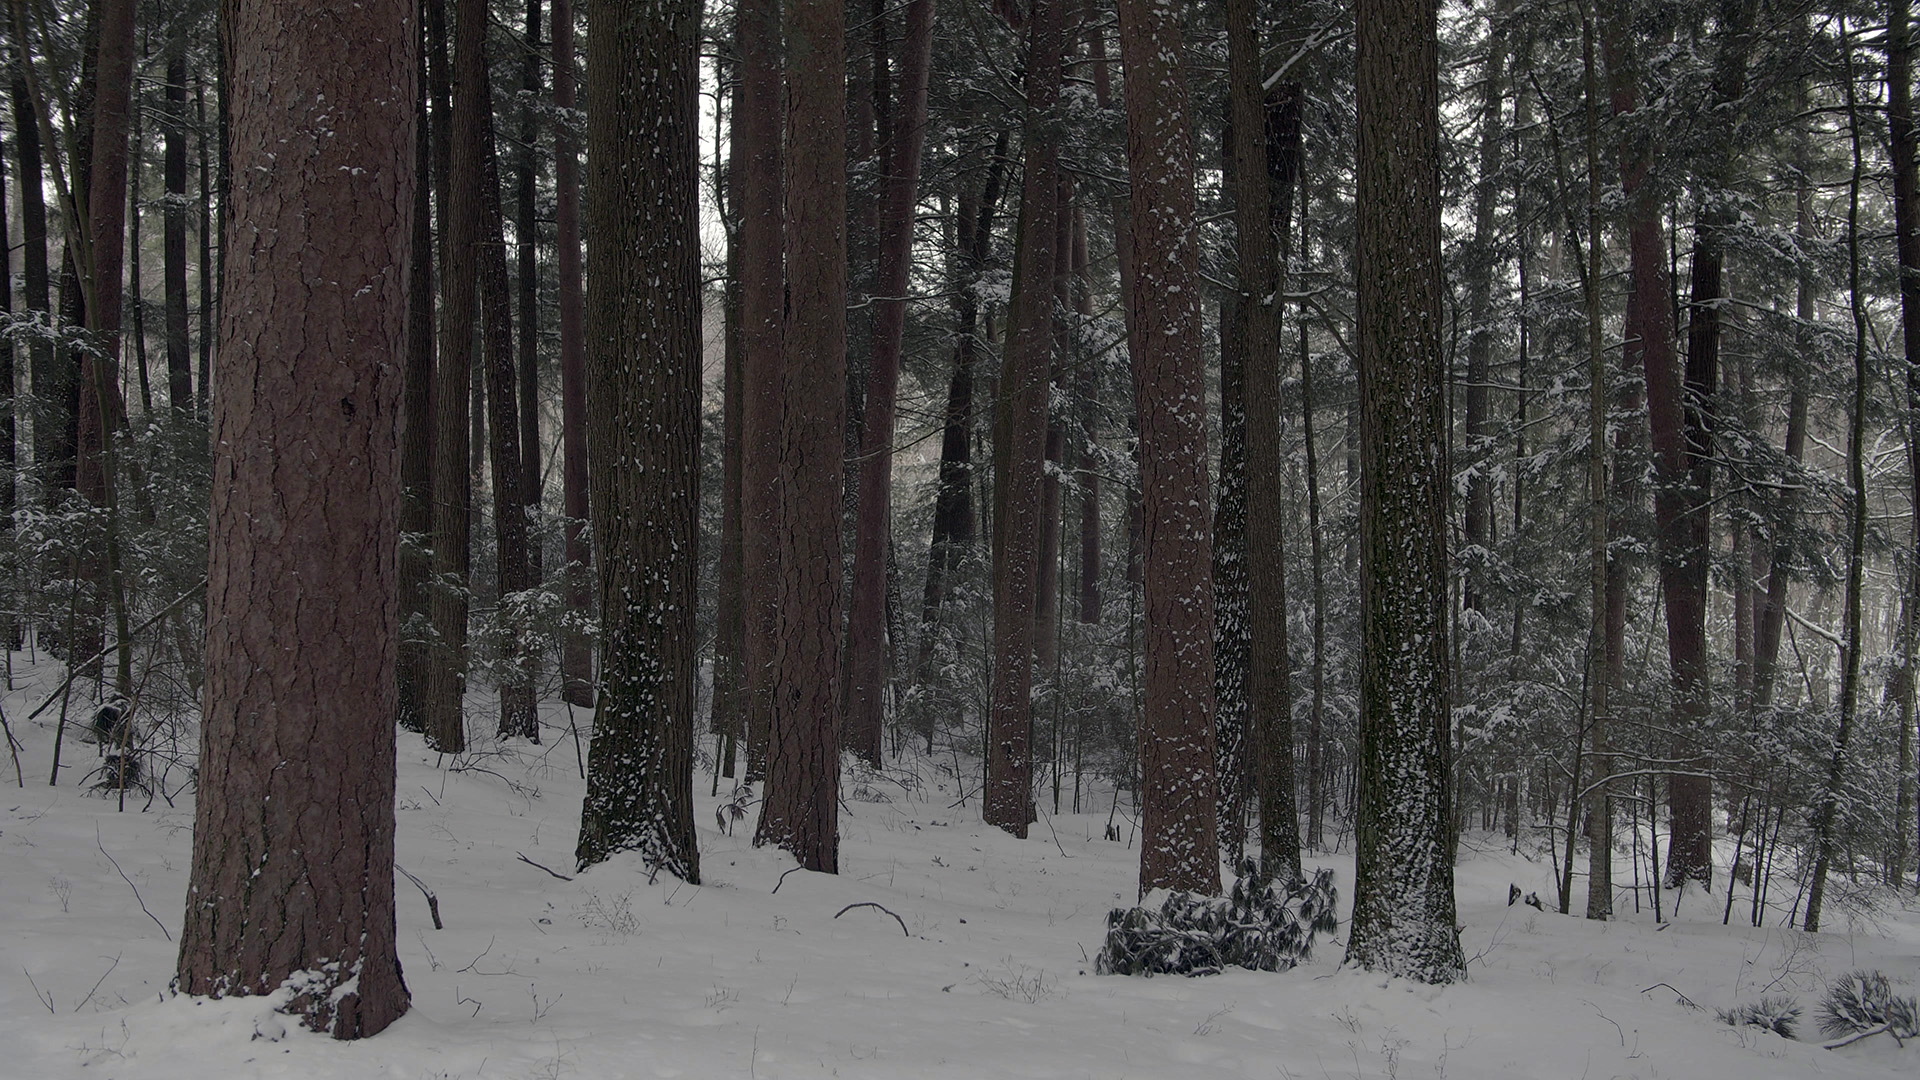 A dense stand of pine trees with snow speckled trunks stands in a wintry landscape.